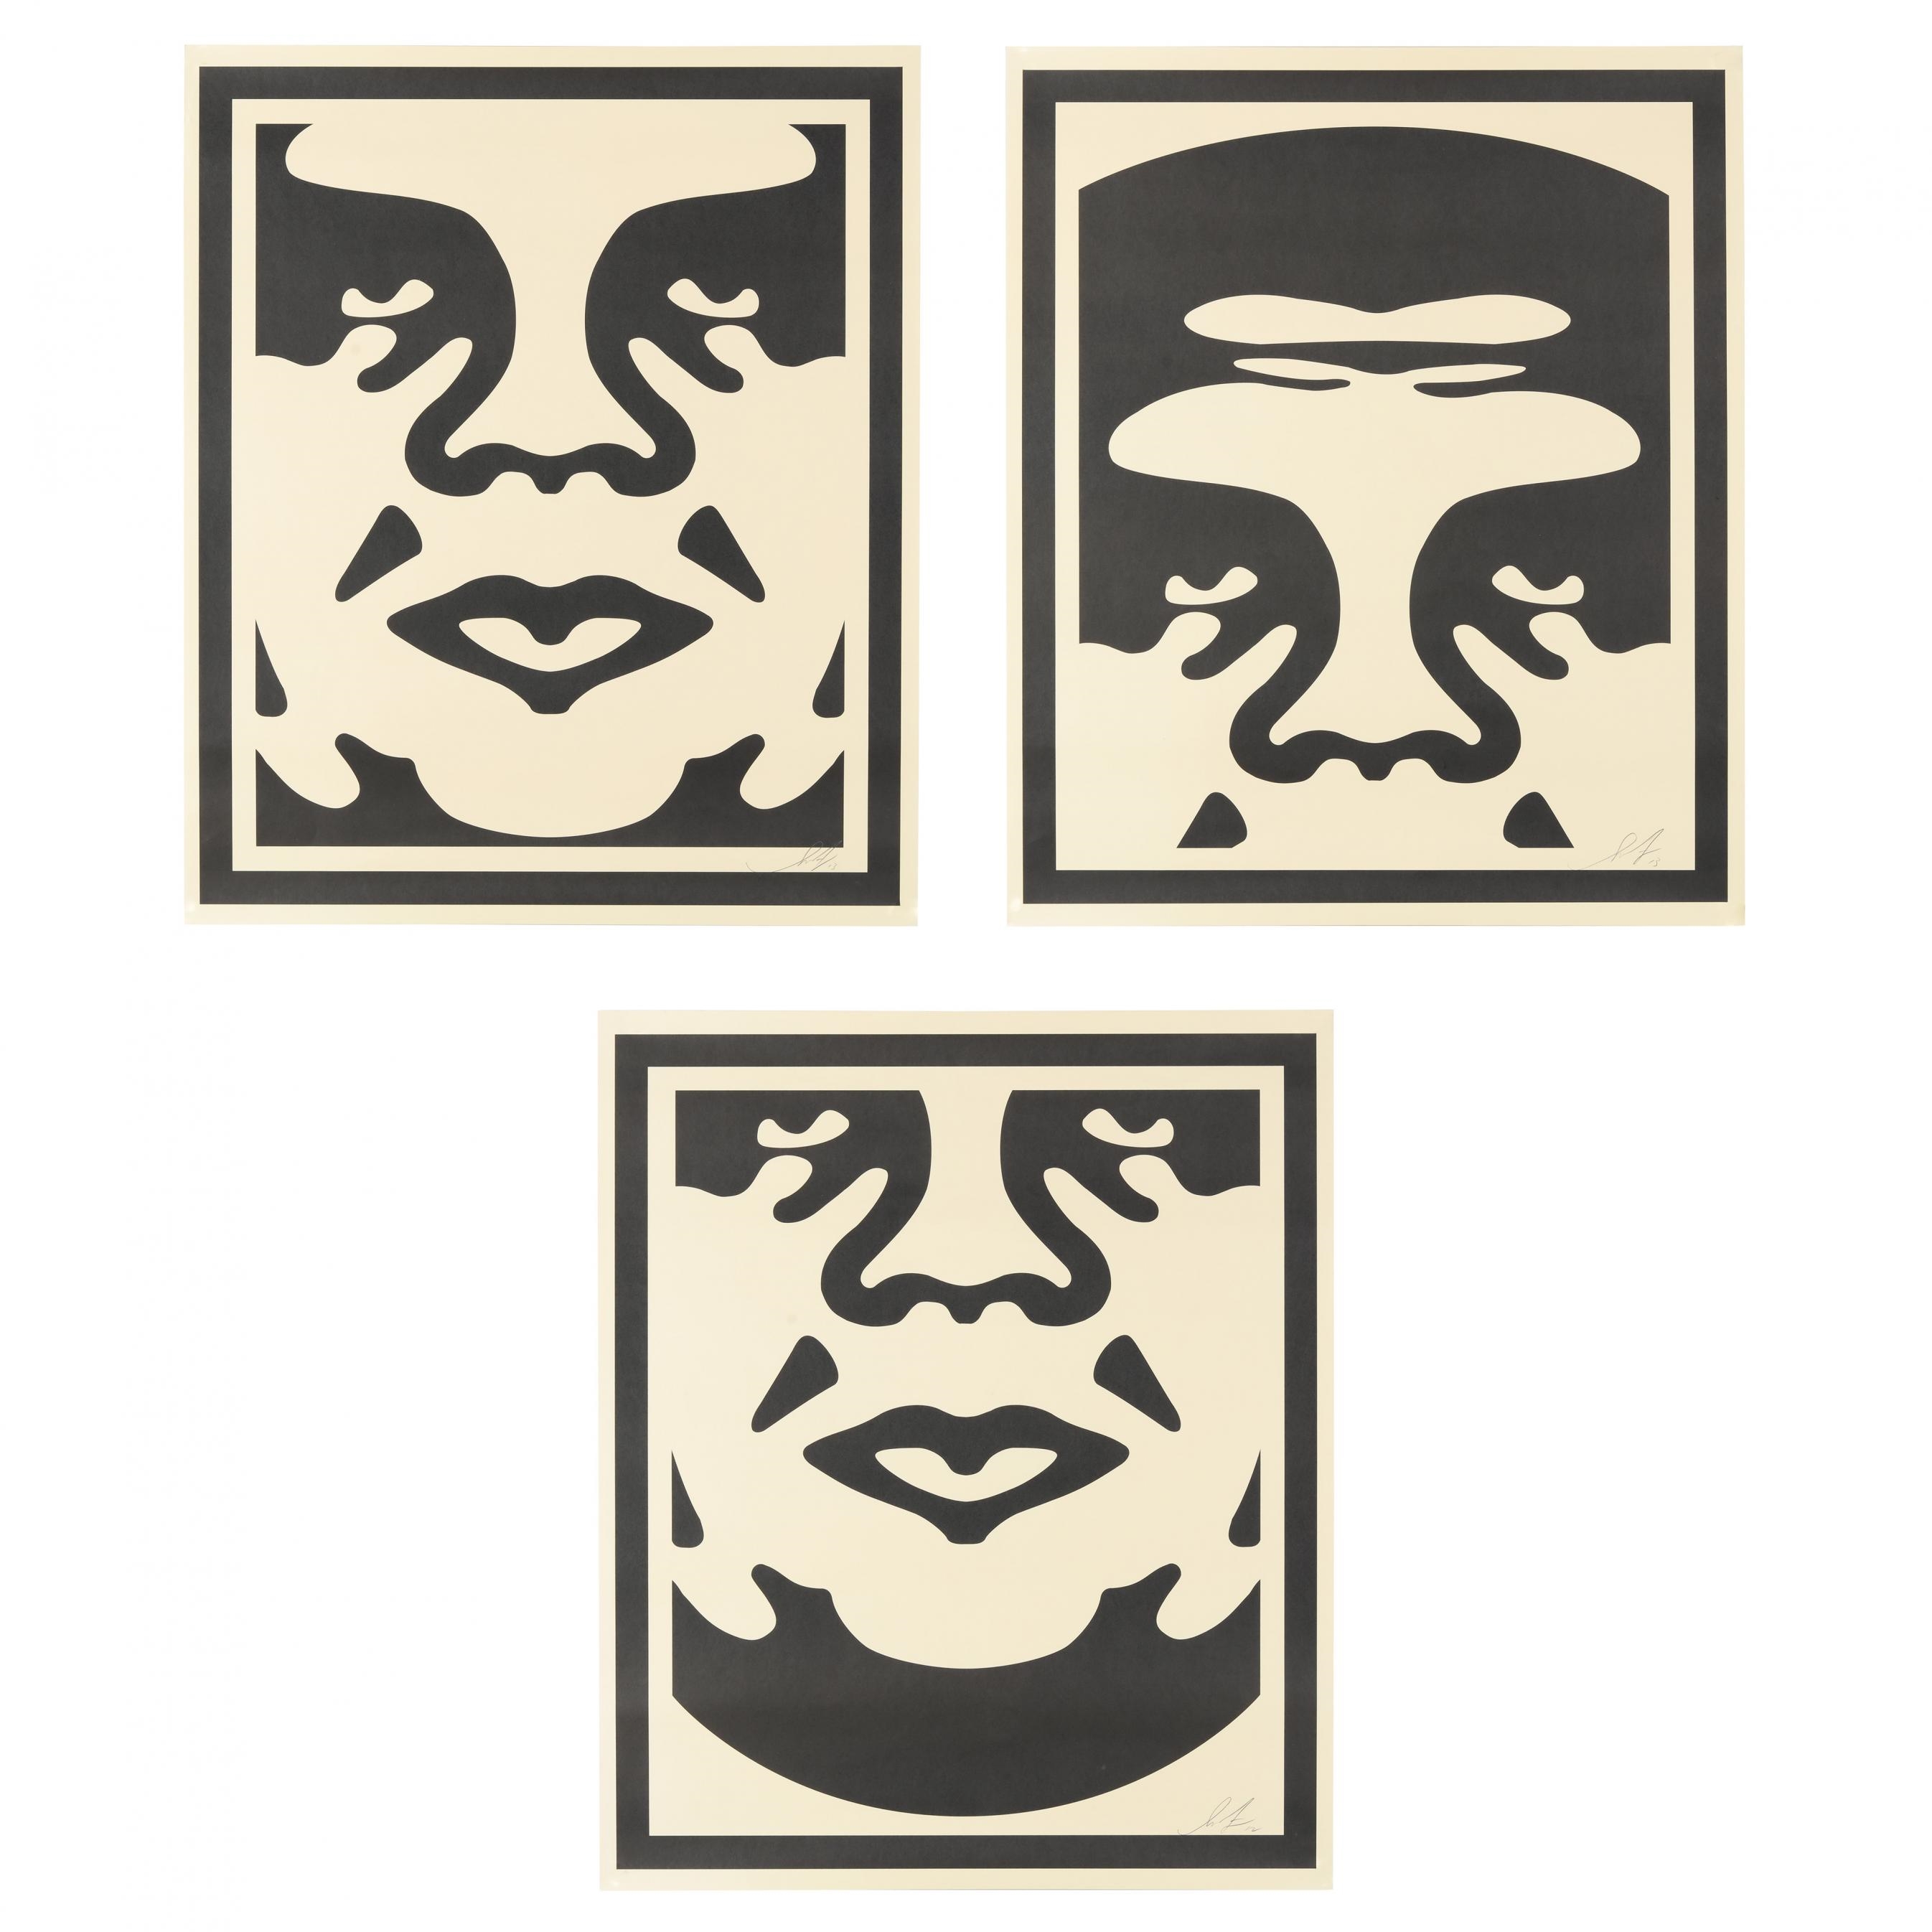 Artwork by Shepard Fairey, Obey Giant Triptych, Made of Screenprints